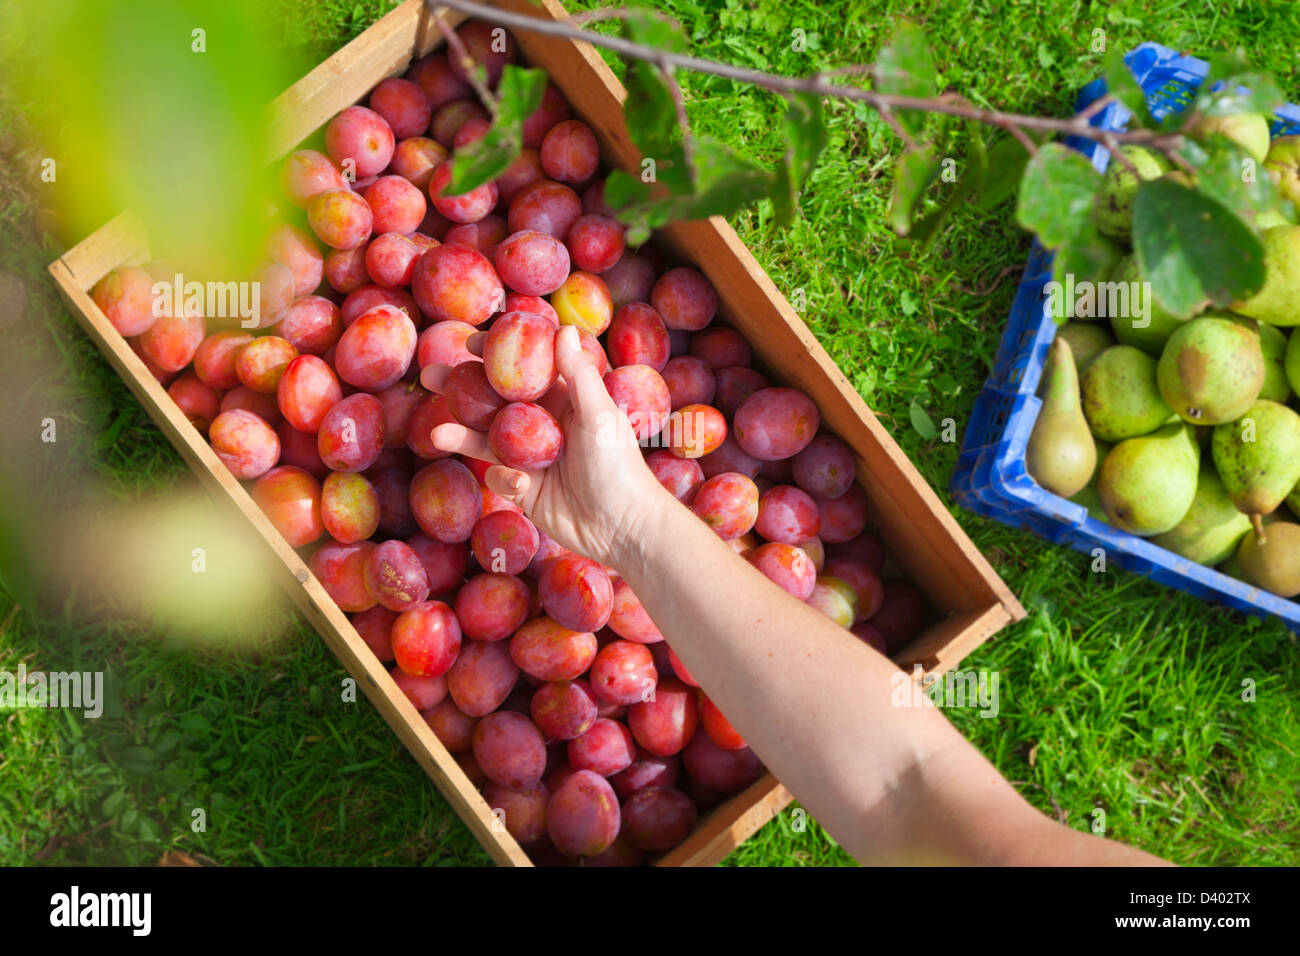 overhead view of someone placing freshly picked plums into a wooden crate. Stock Photo